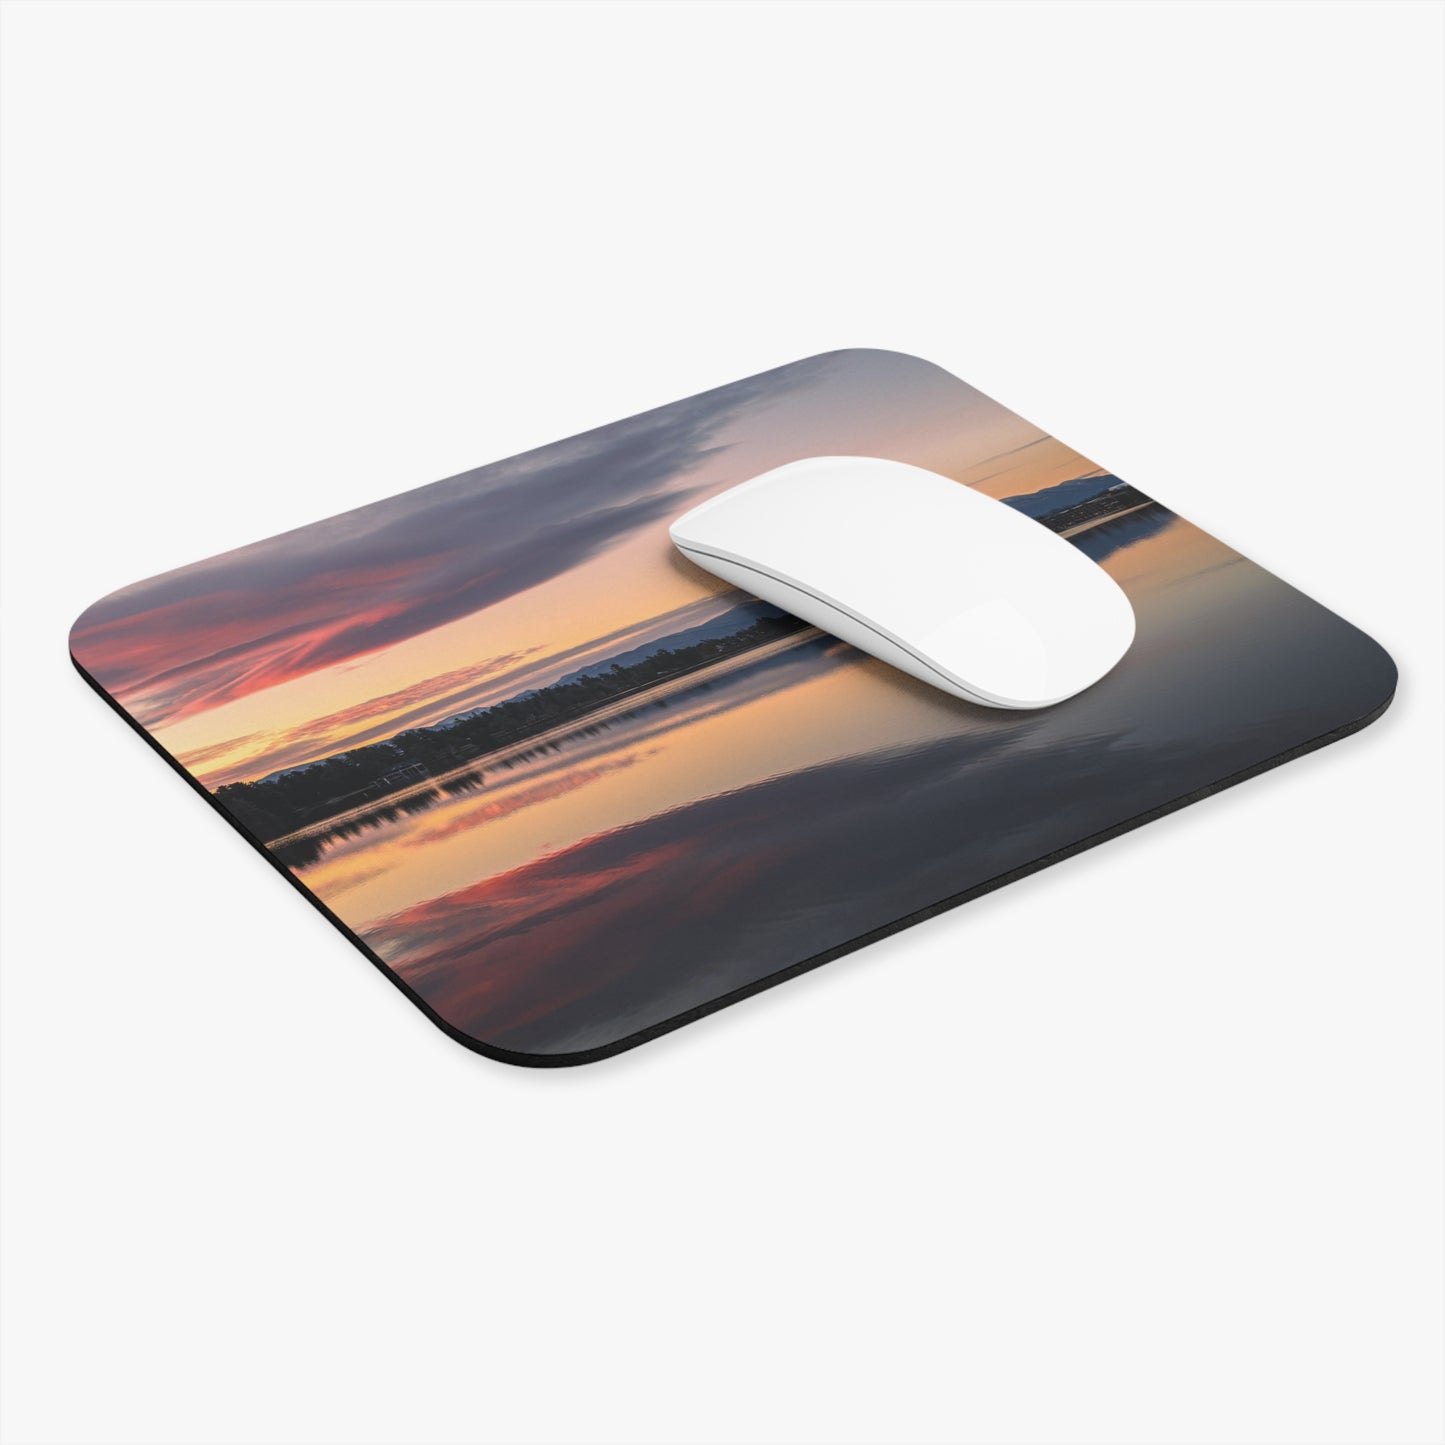 Mirror Lake: Double the Beauty Mouse Pad